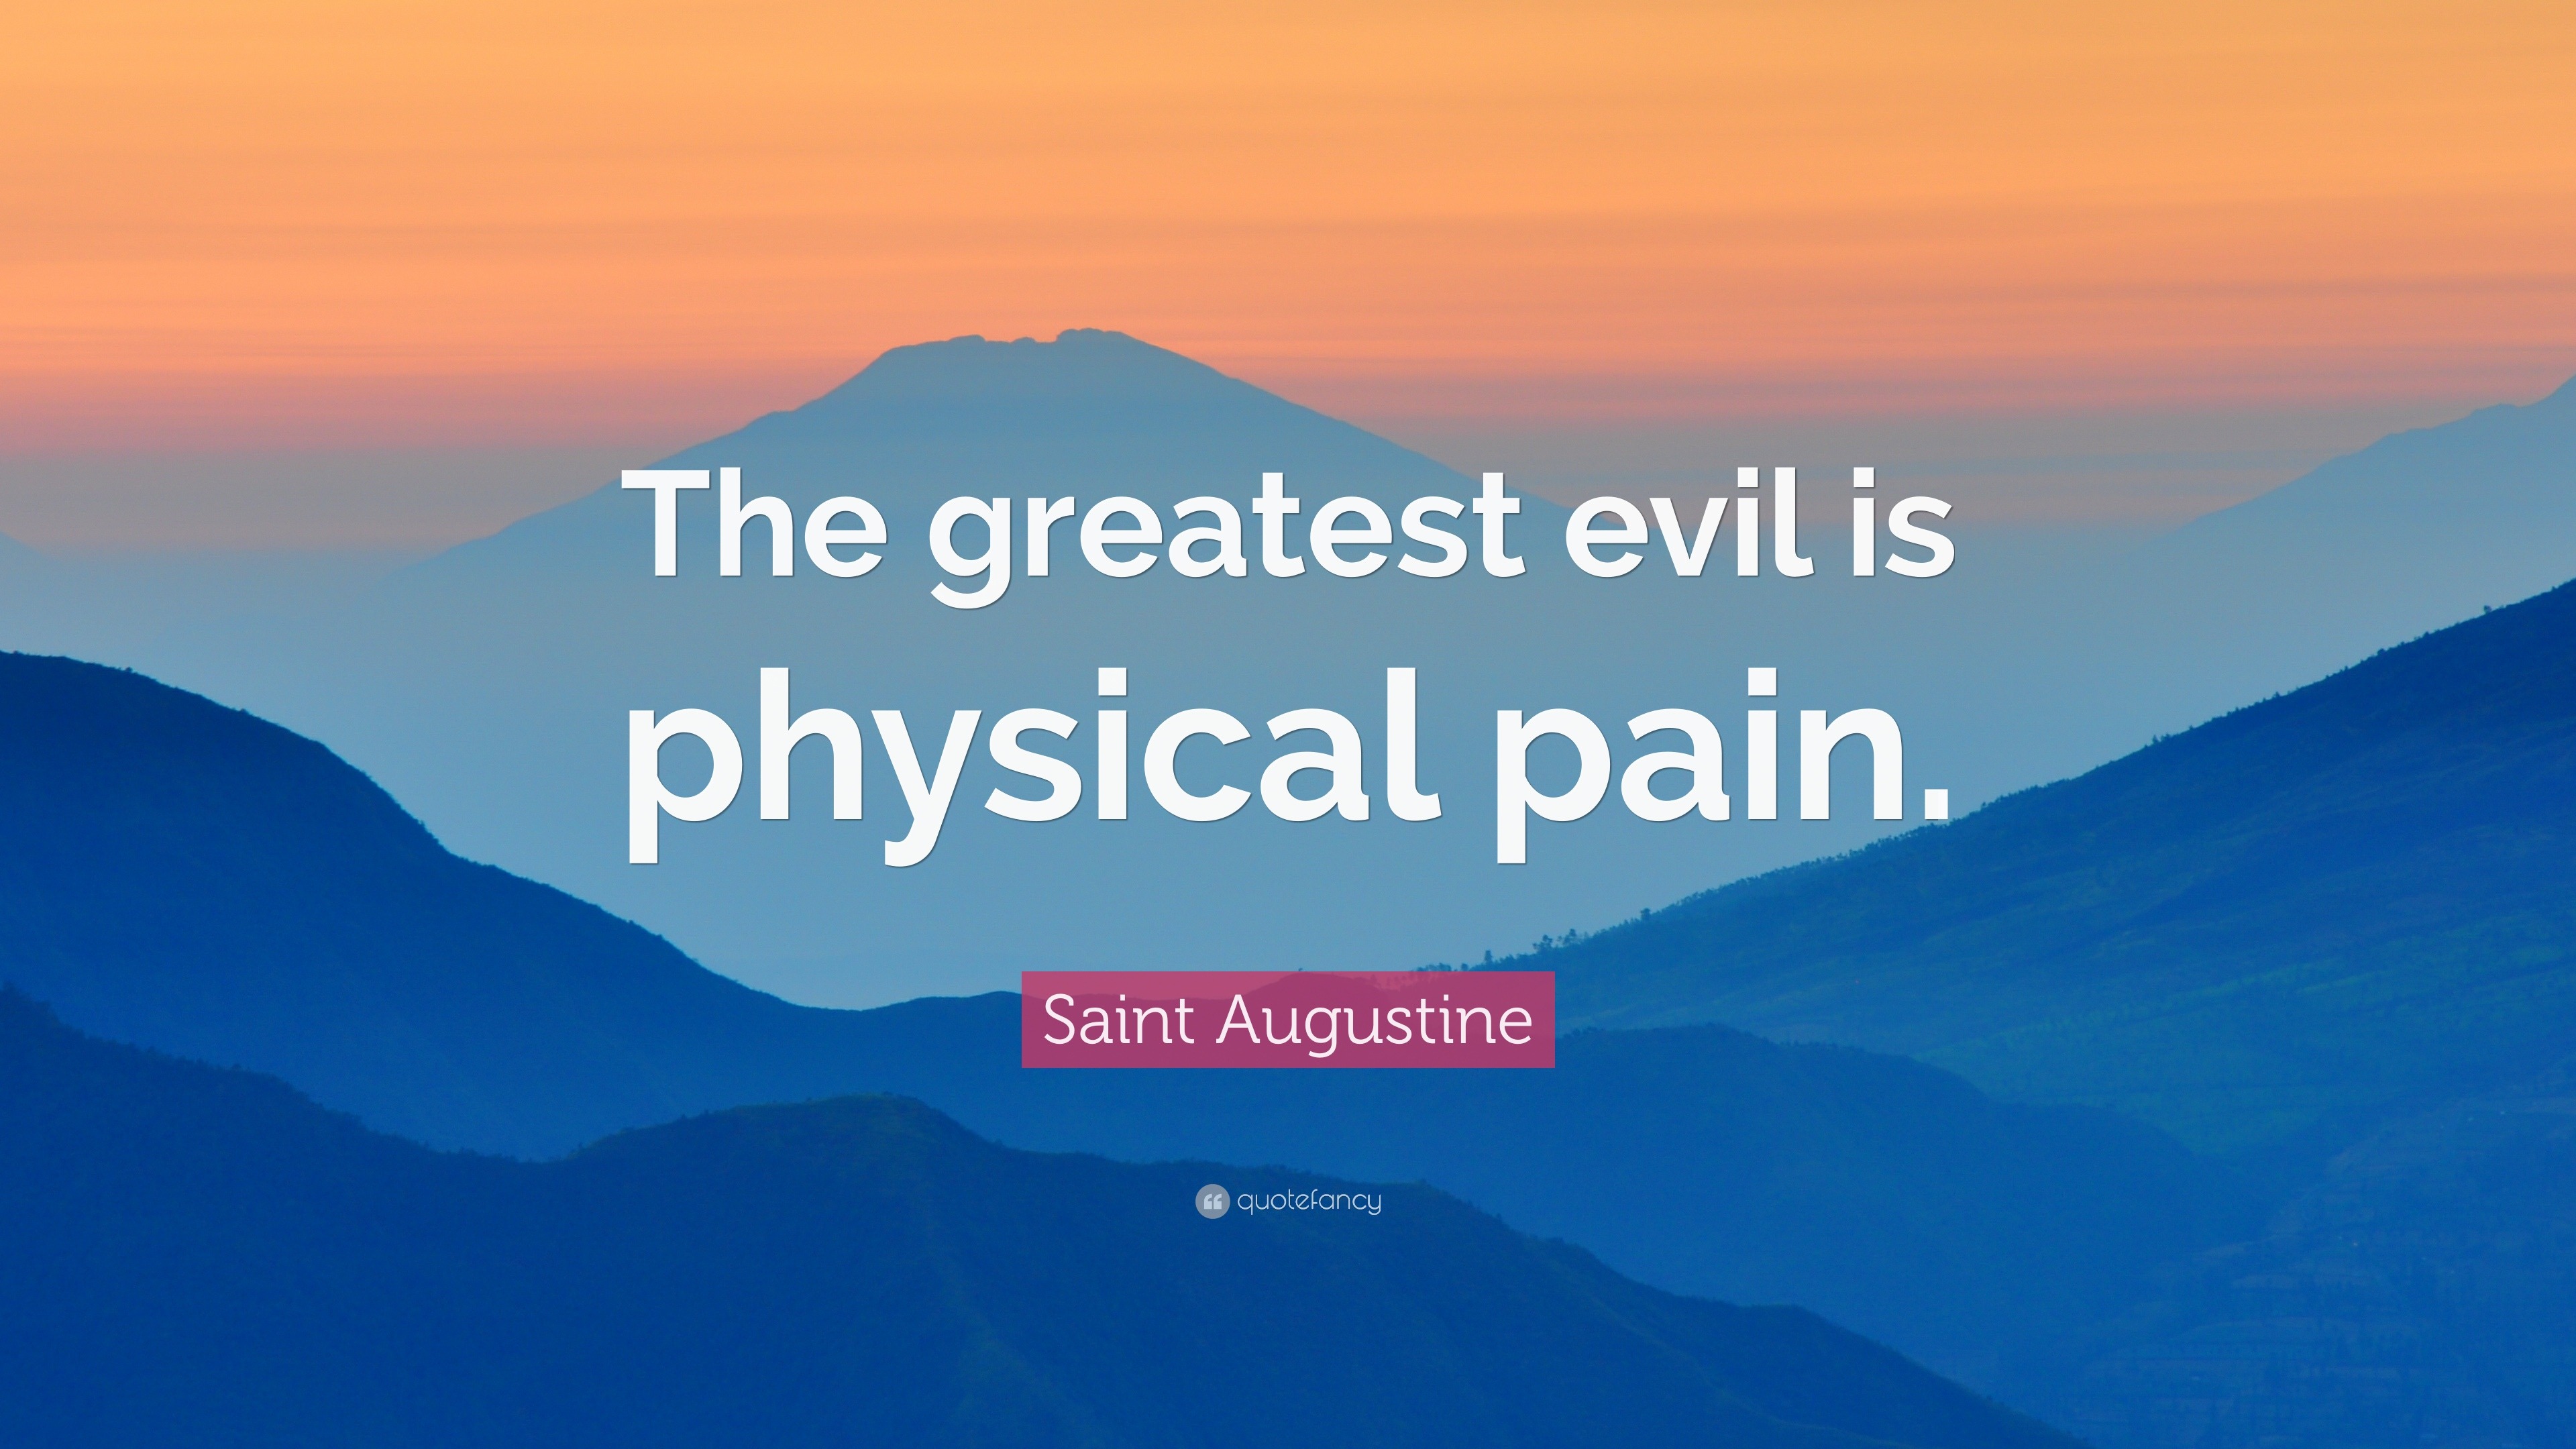 Saint Augustine Quote: "The greatest evil is physical pain ...